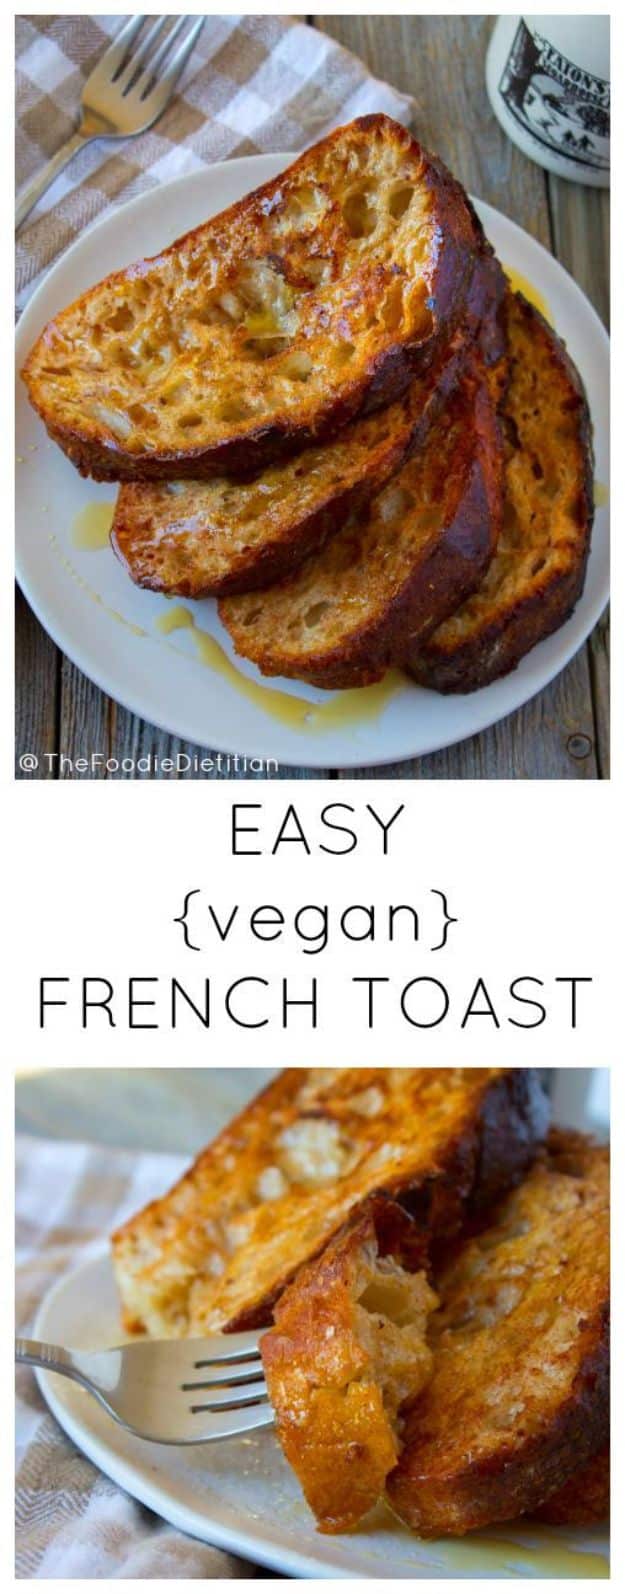 French Toast Recipes - Easy Vegan French Toast - Best Brunch Bites and Breakfast Ideas for French Toast - Stuffed, Baked and Creme Brulee Toasts With Fruit - Healthy Sugar Free, Gluten Free and Keto Versions - Casserole Ideas for Parties and Feeding A Crowd, Sticks and Overnight Prep - How To Make French Toast Perfectly, Classic Powdered Sugar French Toast Recipe #breakfast #frenchtoast